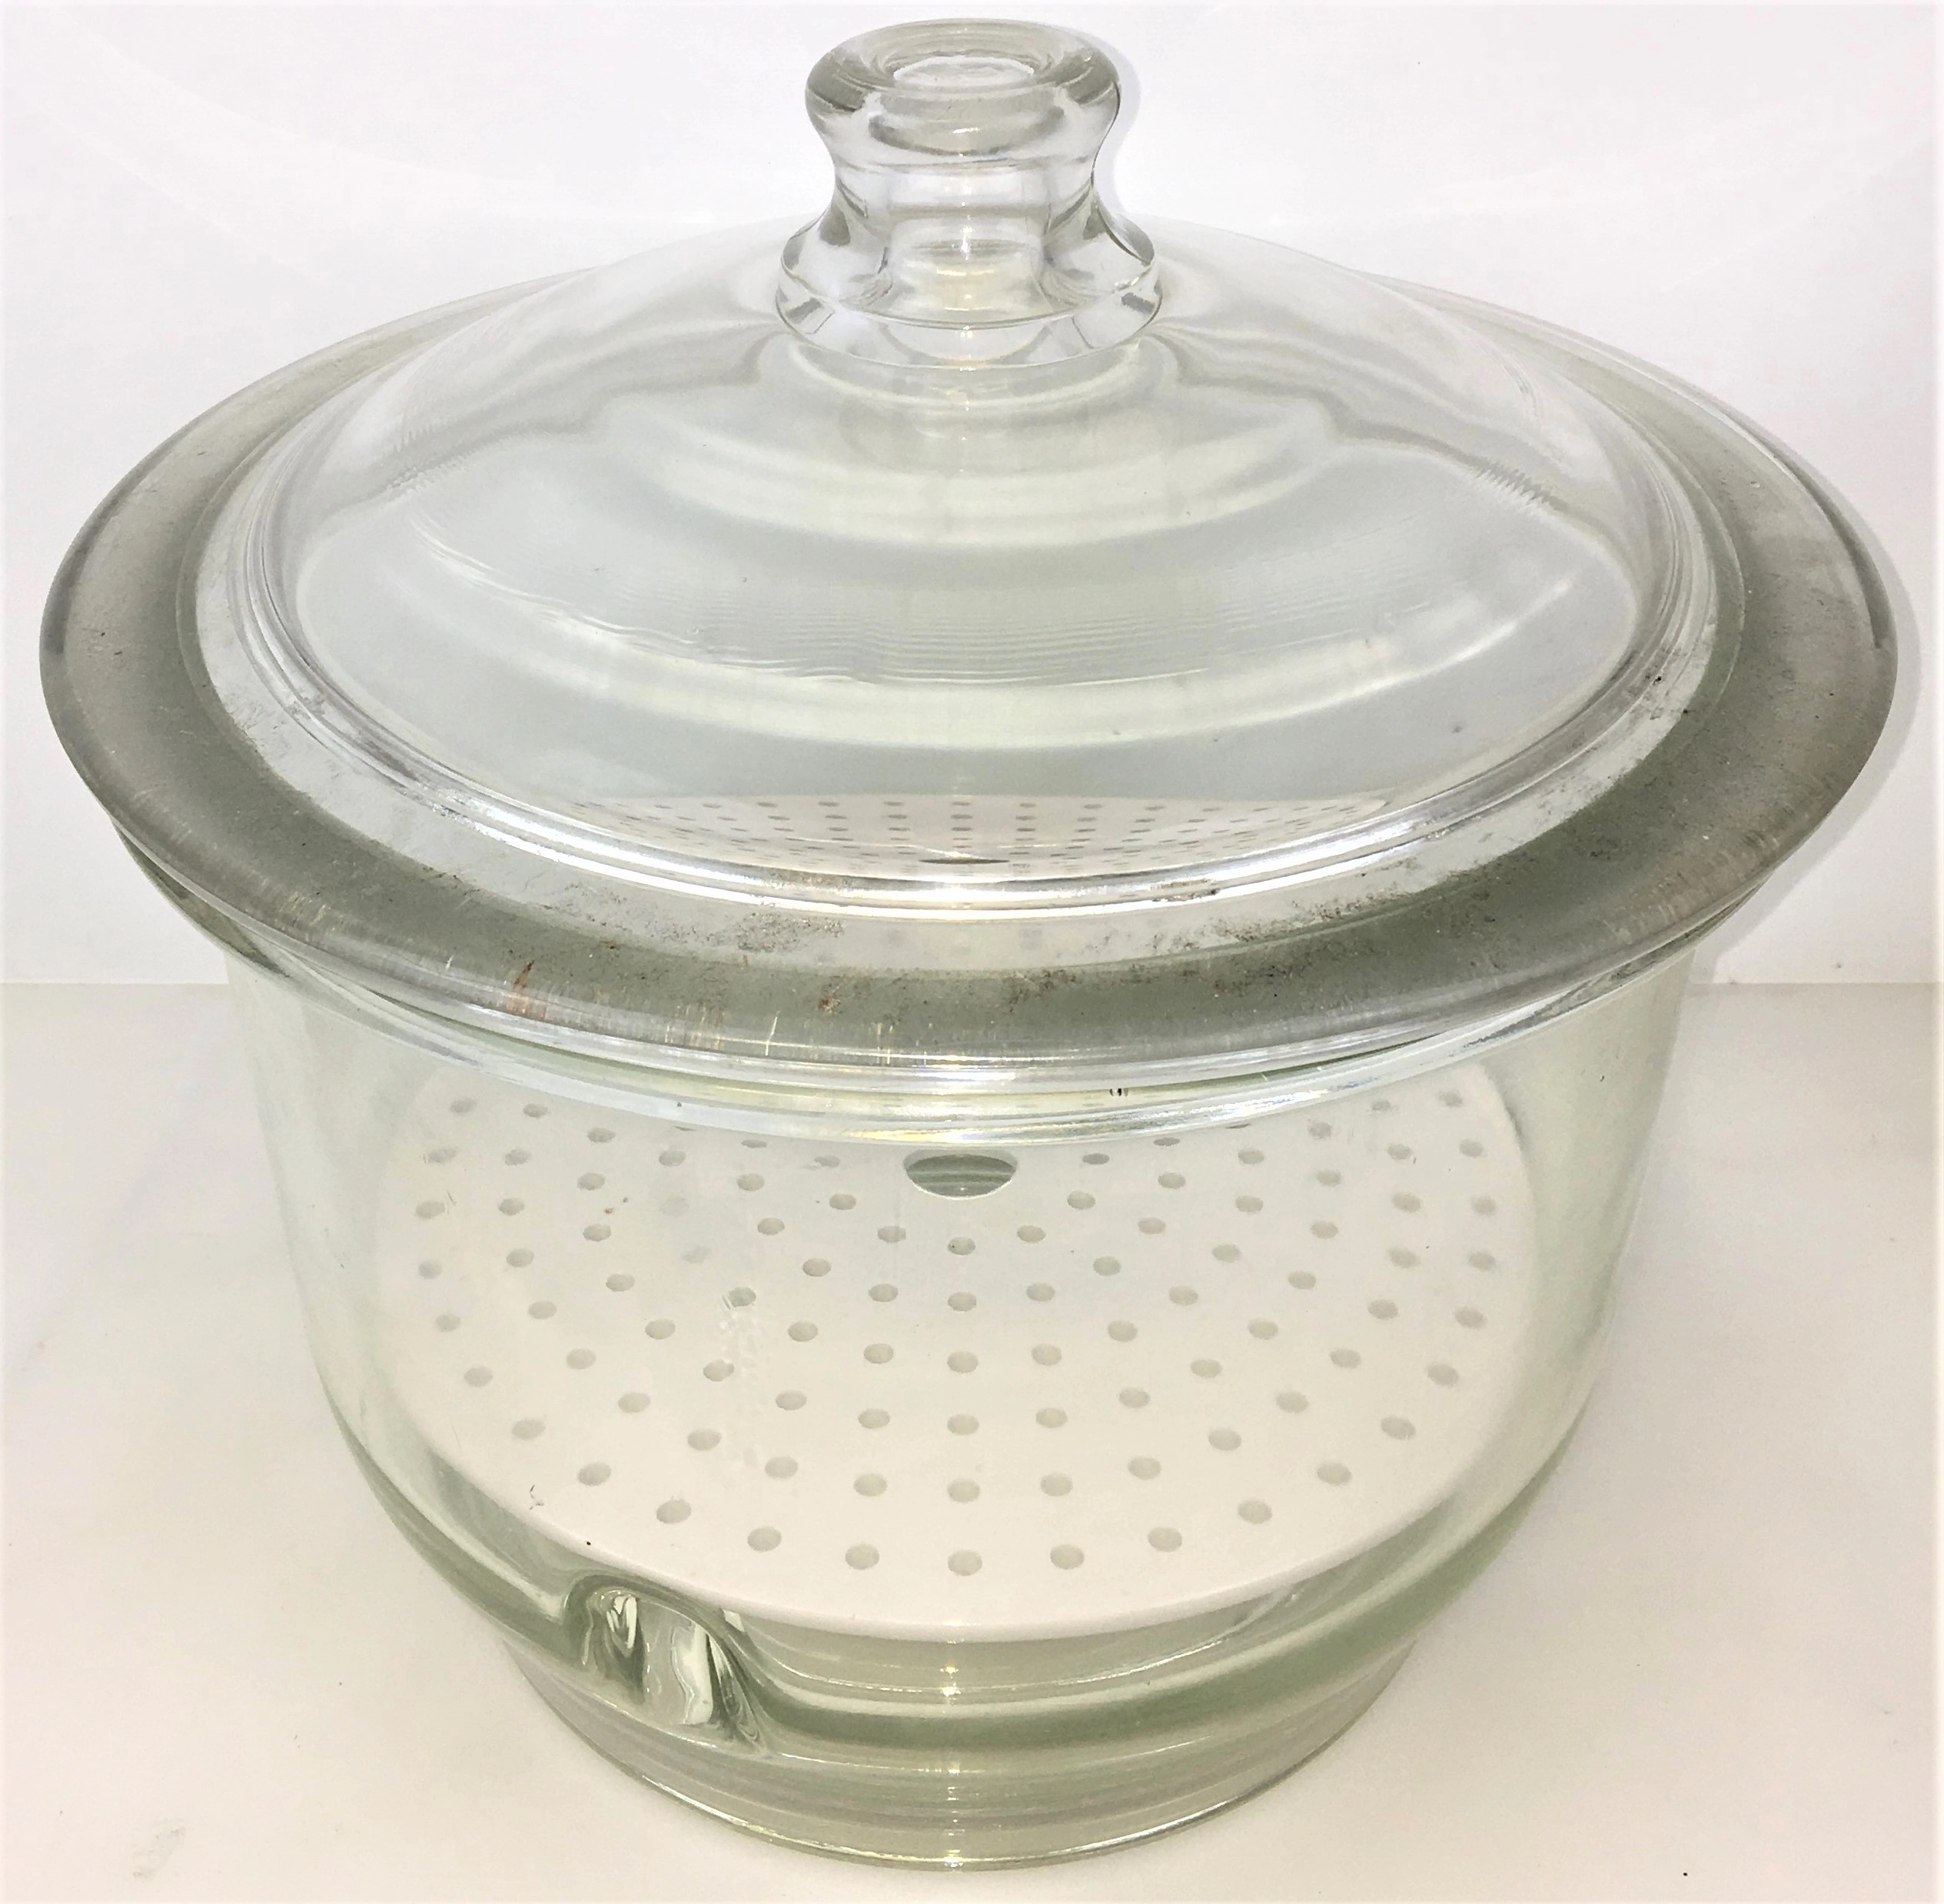 Corning PYREX 250 mm ID Glass Desiccator with Coors Plate